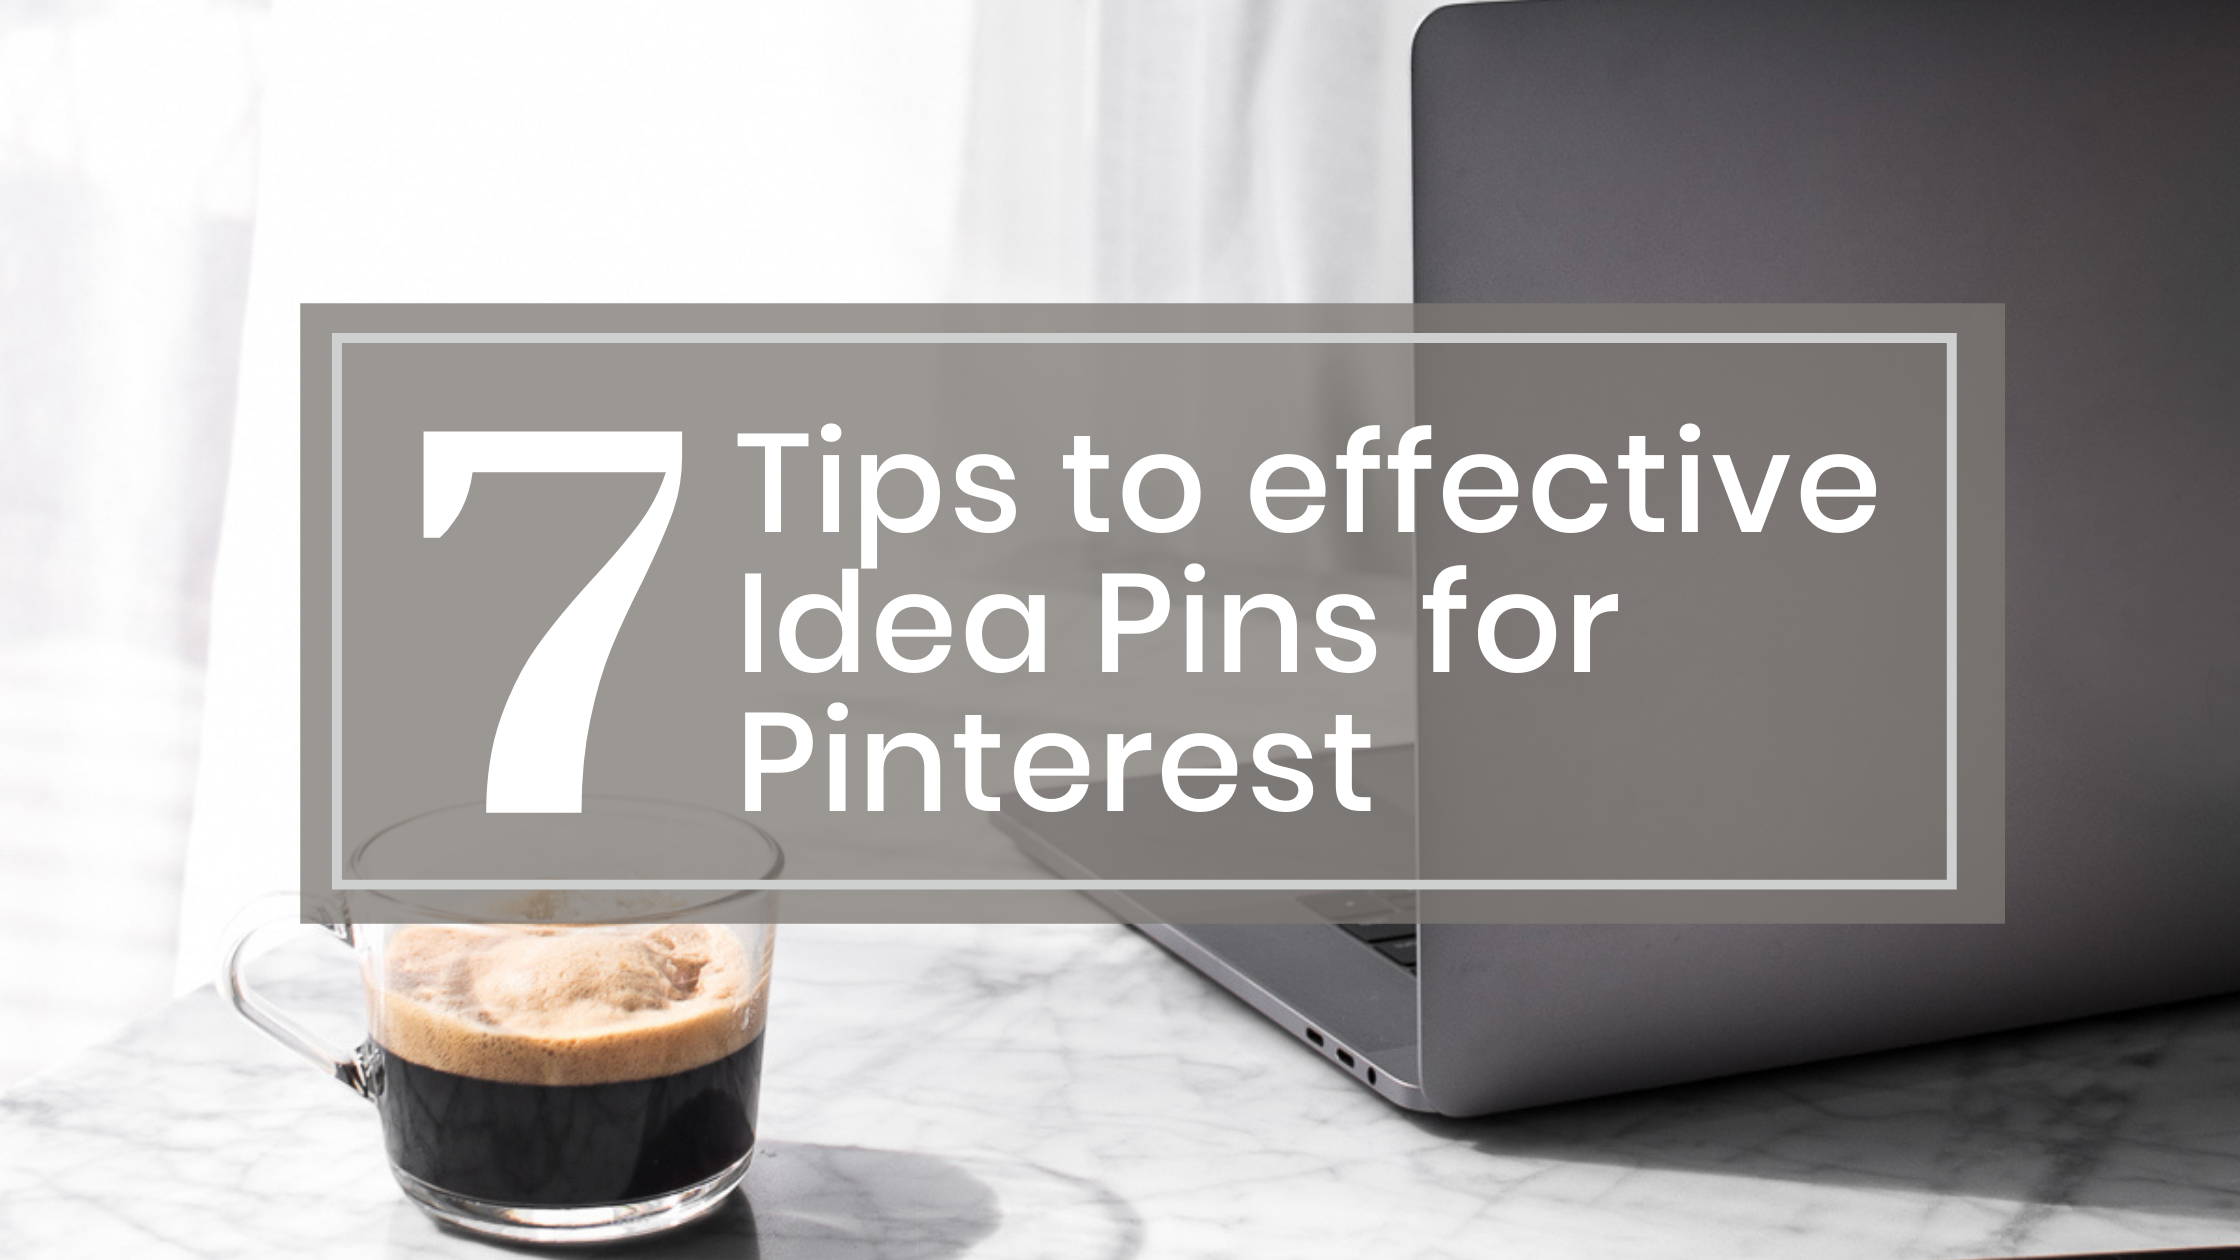 7 tips to effective idea pins for Pinterest